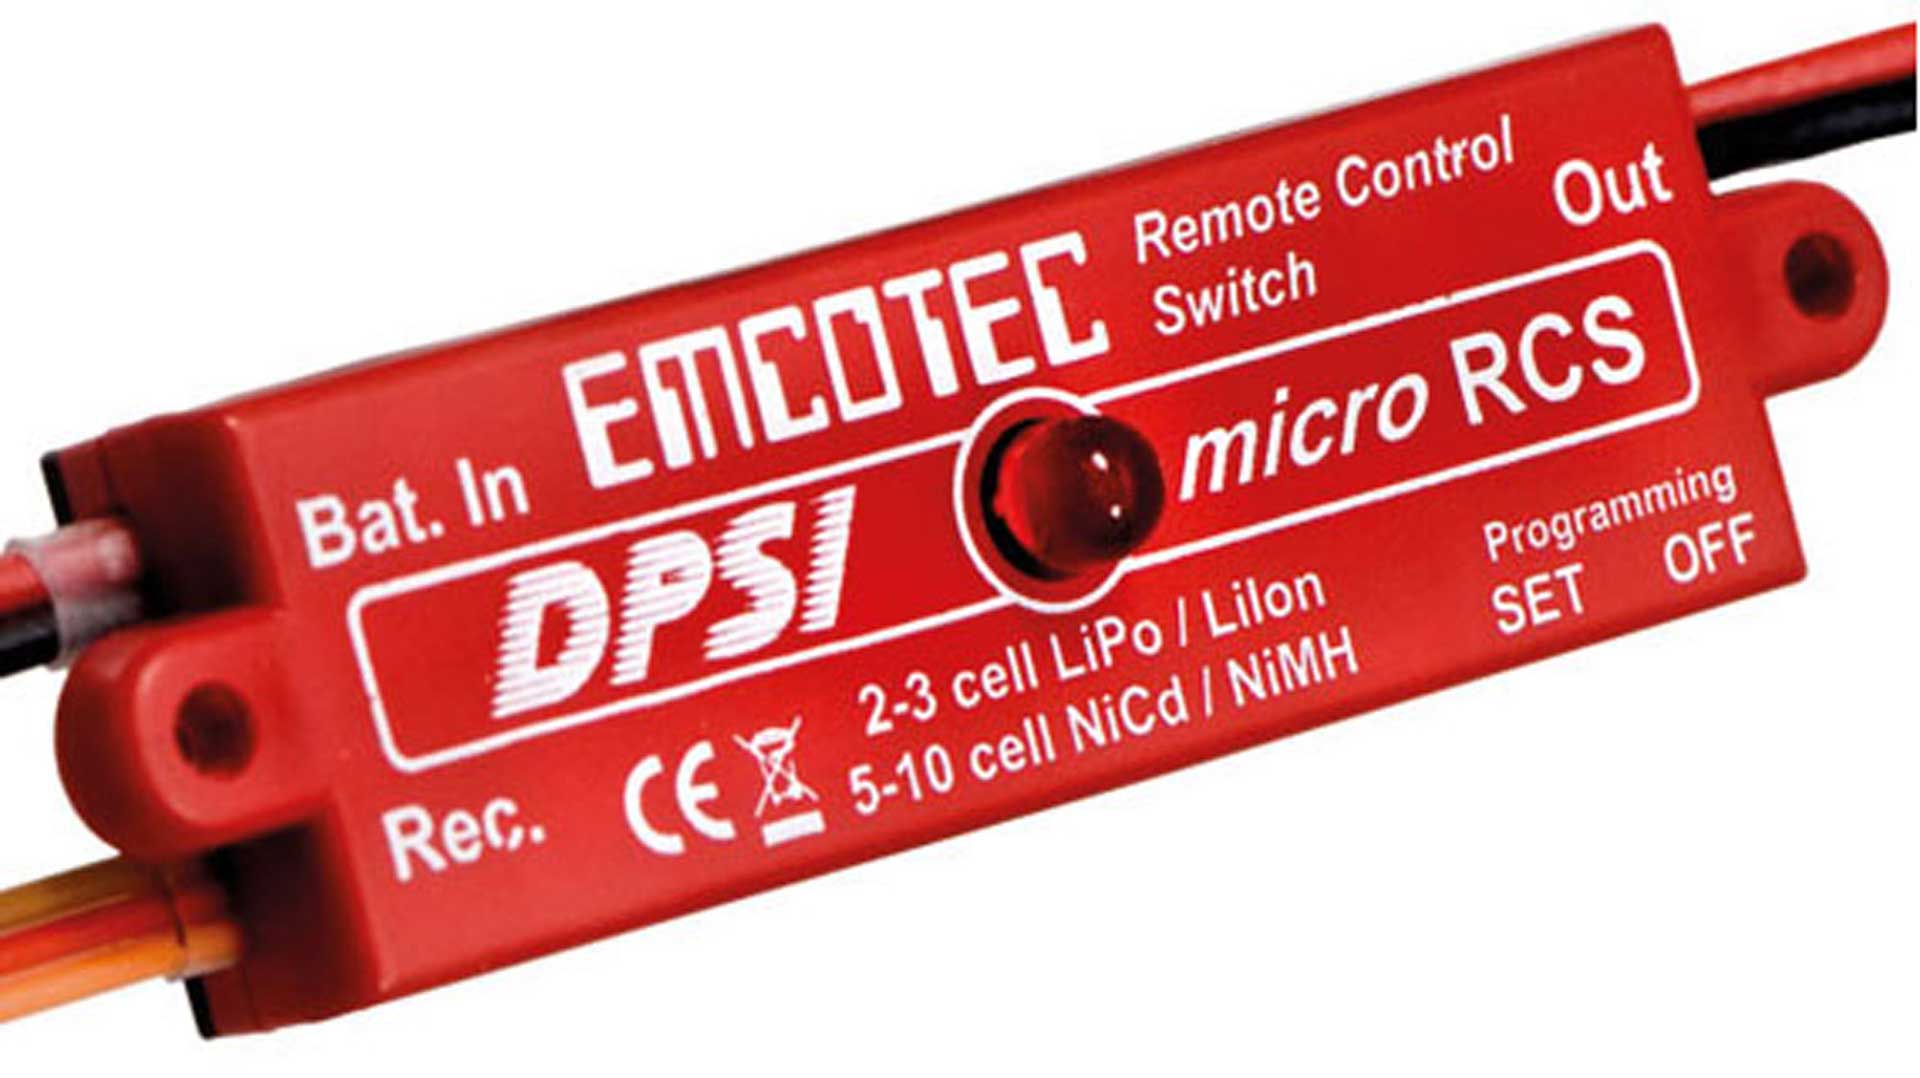 EMCOTEC DPSI MICRO RCS MPC REMOTELY CONTROLLED SWITCH